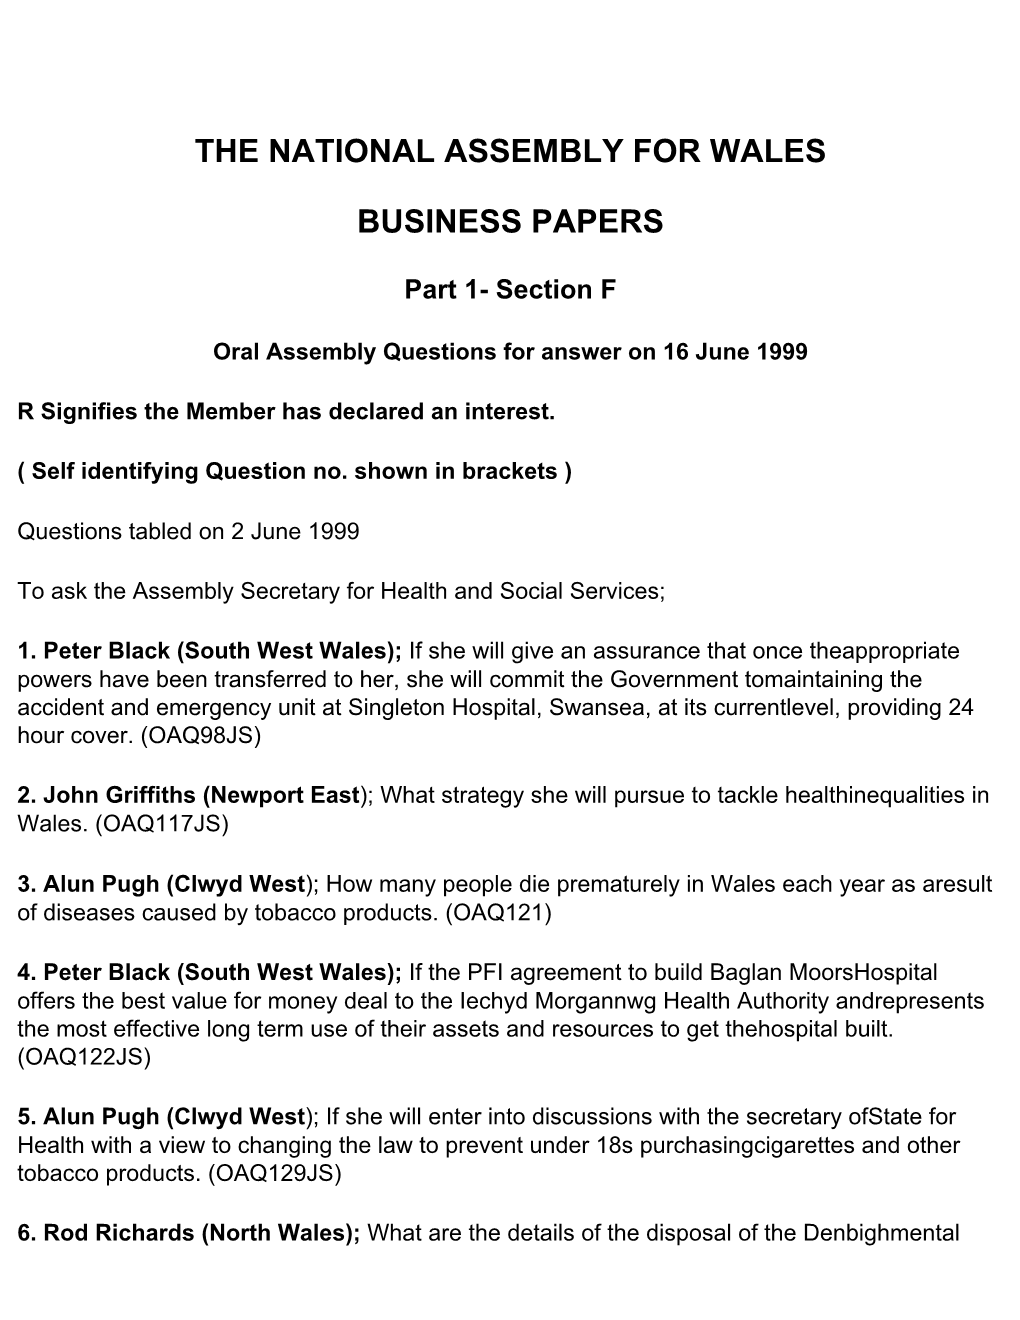 The National Assembly for Wales Business Papers